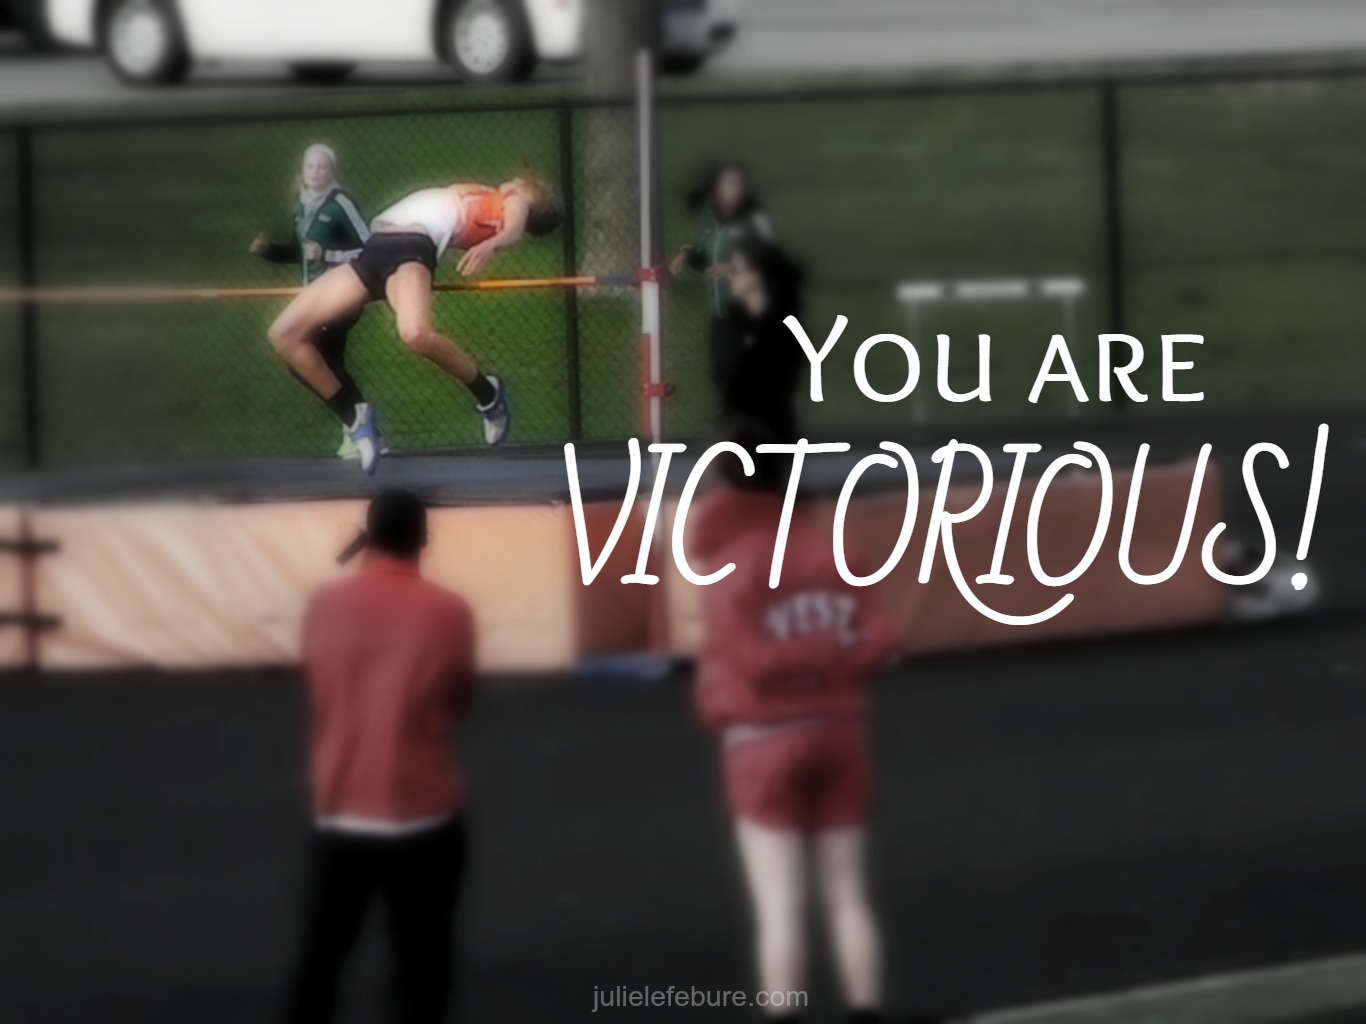 Friend, You Are Victorious